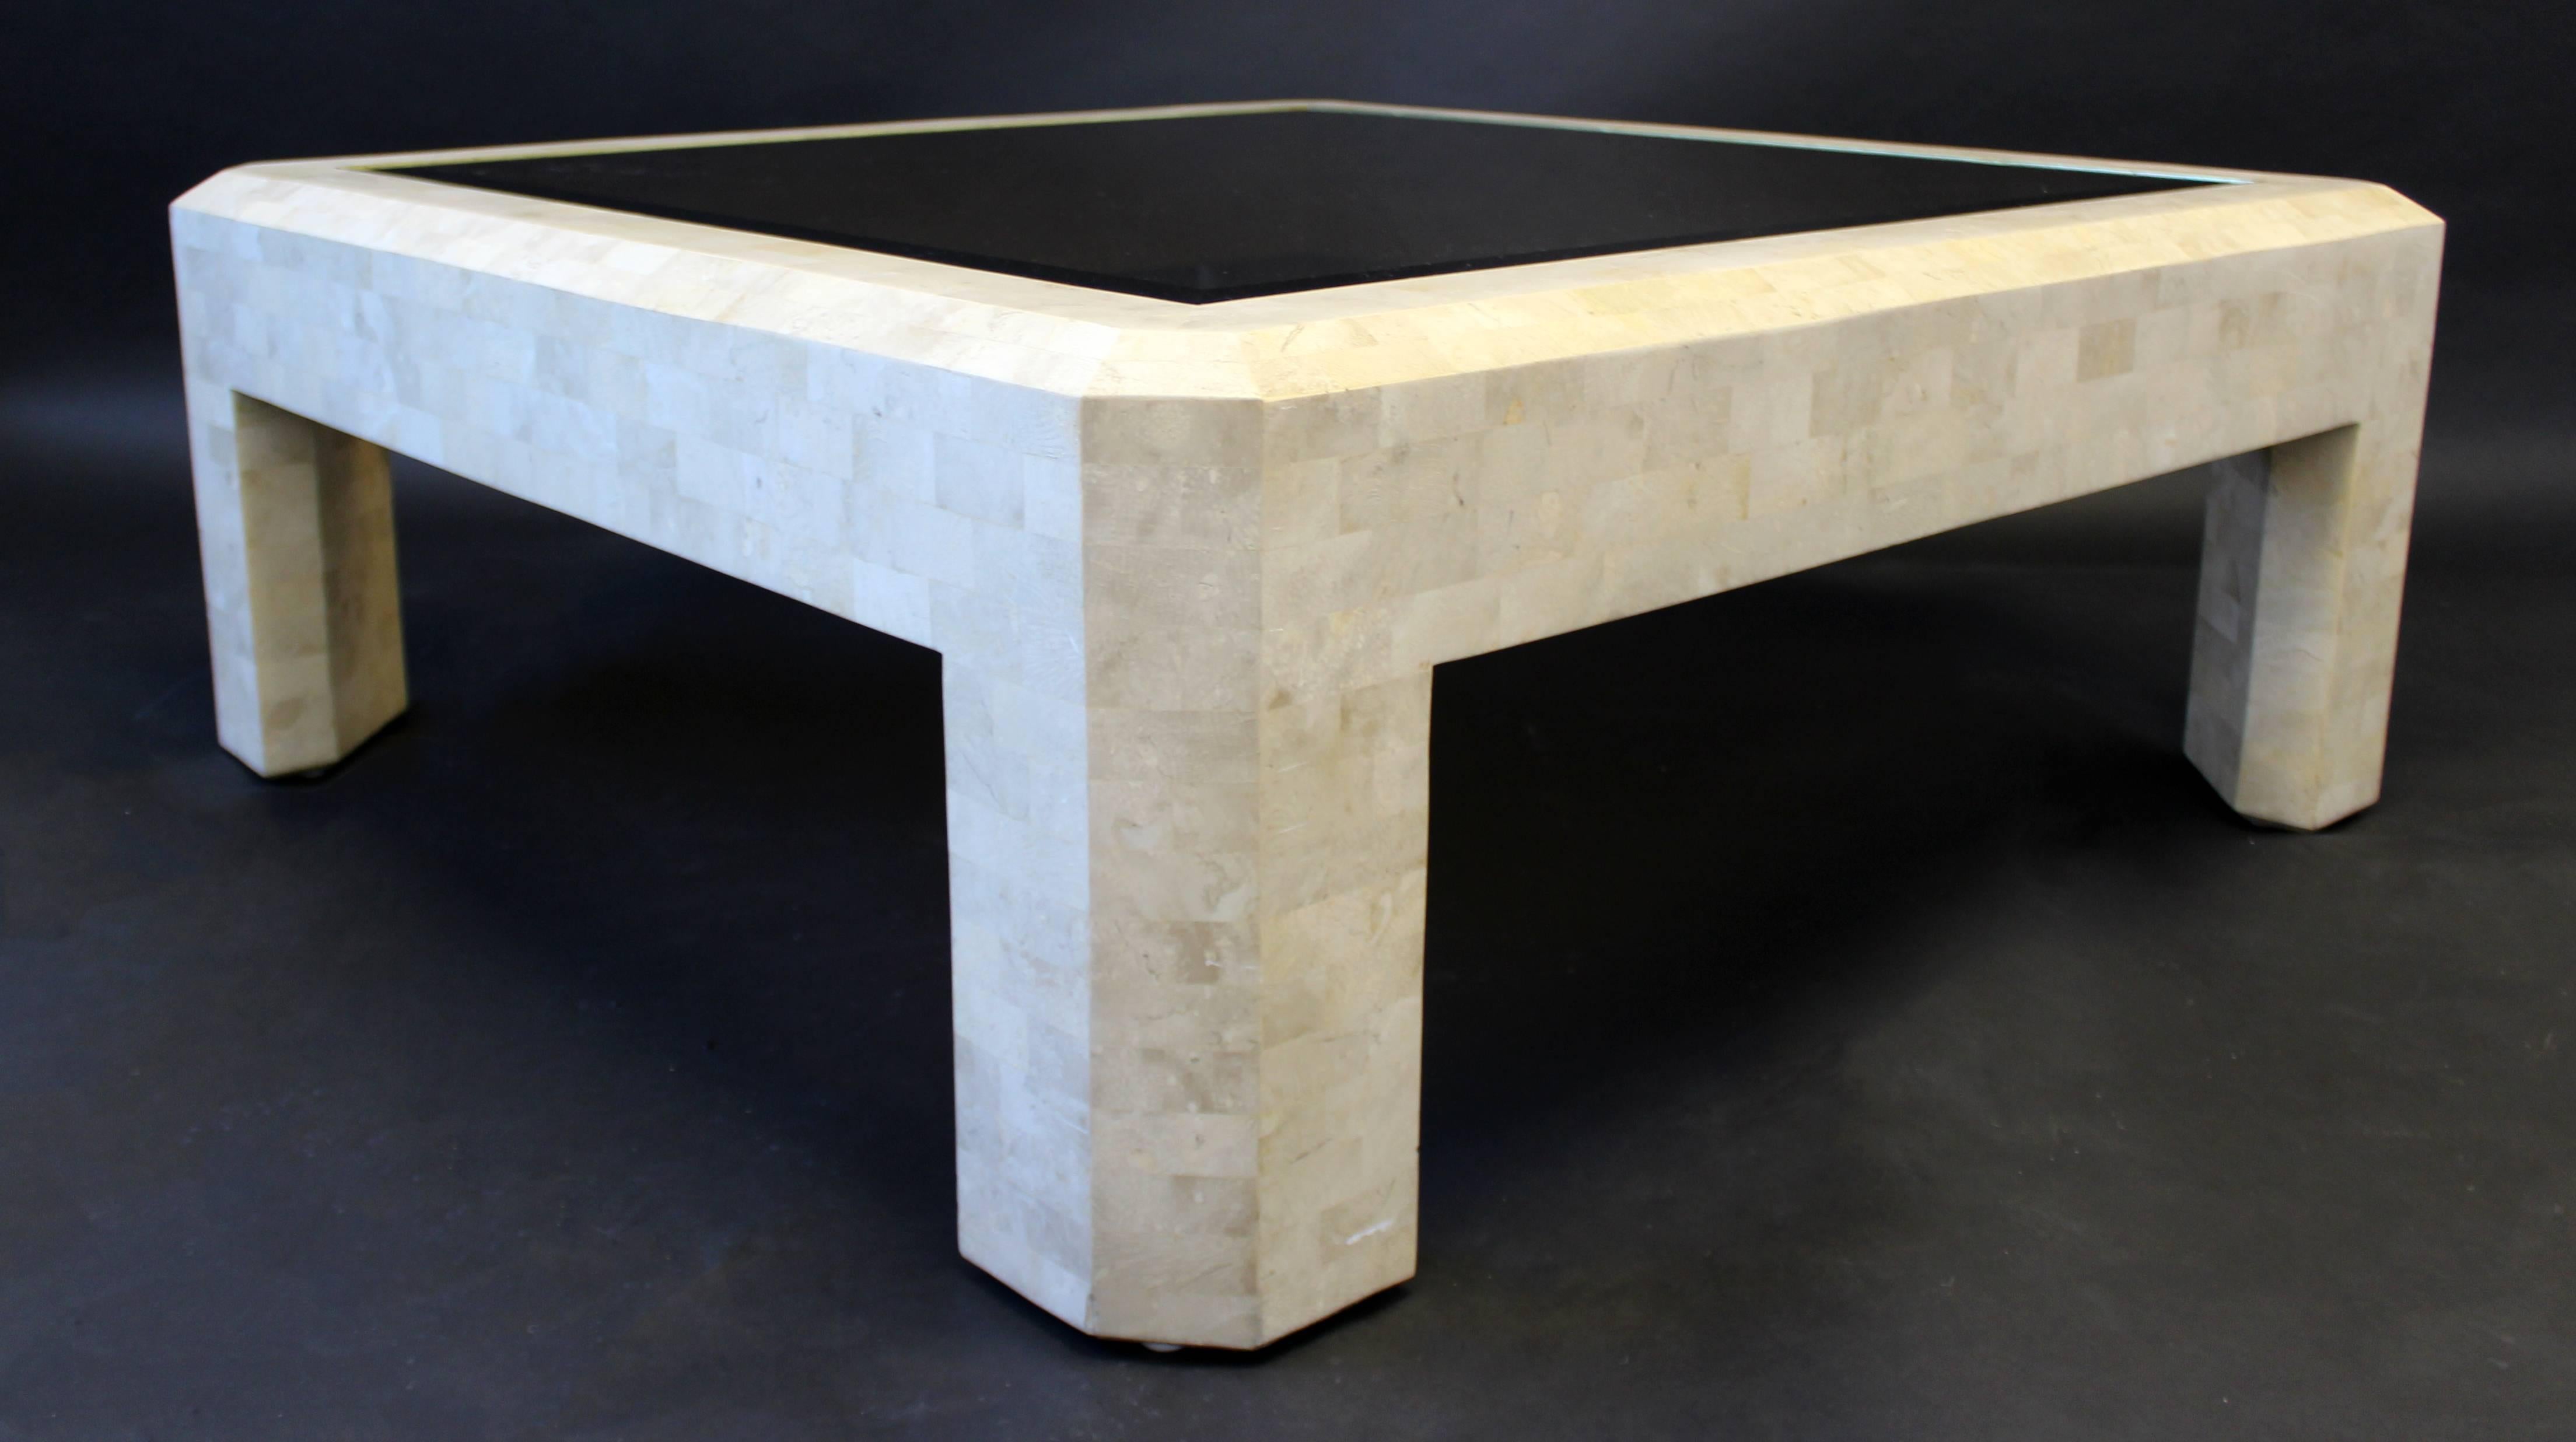 For your consideration is a gorgeous tessellated stone and brass coffee table, with a smoked glass top, by Maitland Smith. In excellent condition. The dimensions are 40